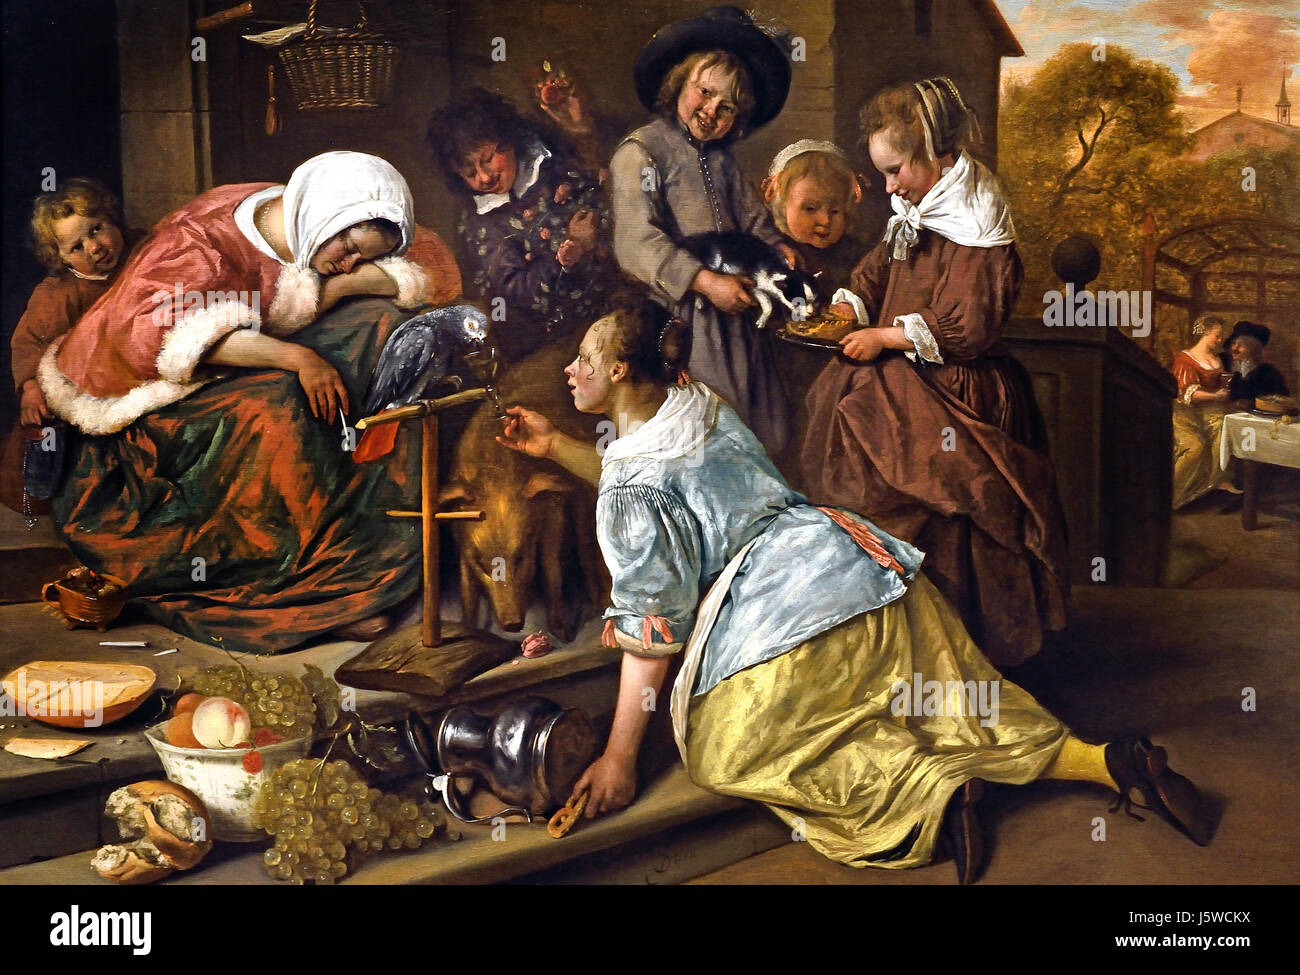 The Effects of Intemperance 1663-5 Jan Steen 1626 - 1679 Dutch The Netherlands ( The woman slumped on the left, whose purse is being picked by a child on the extreme left, is sleeping off the effects of alcohol. She illustrates the proverb 'De Wijn is een spotter' (Wine is a mocker). ) Stock Photo